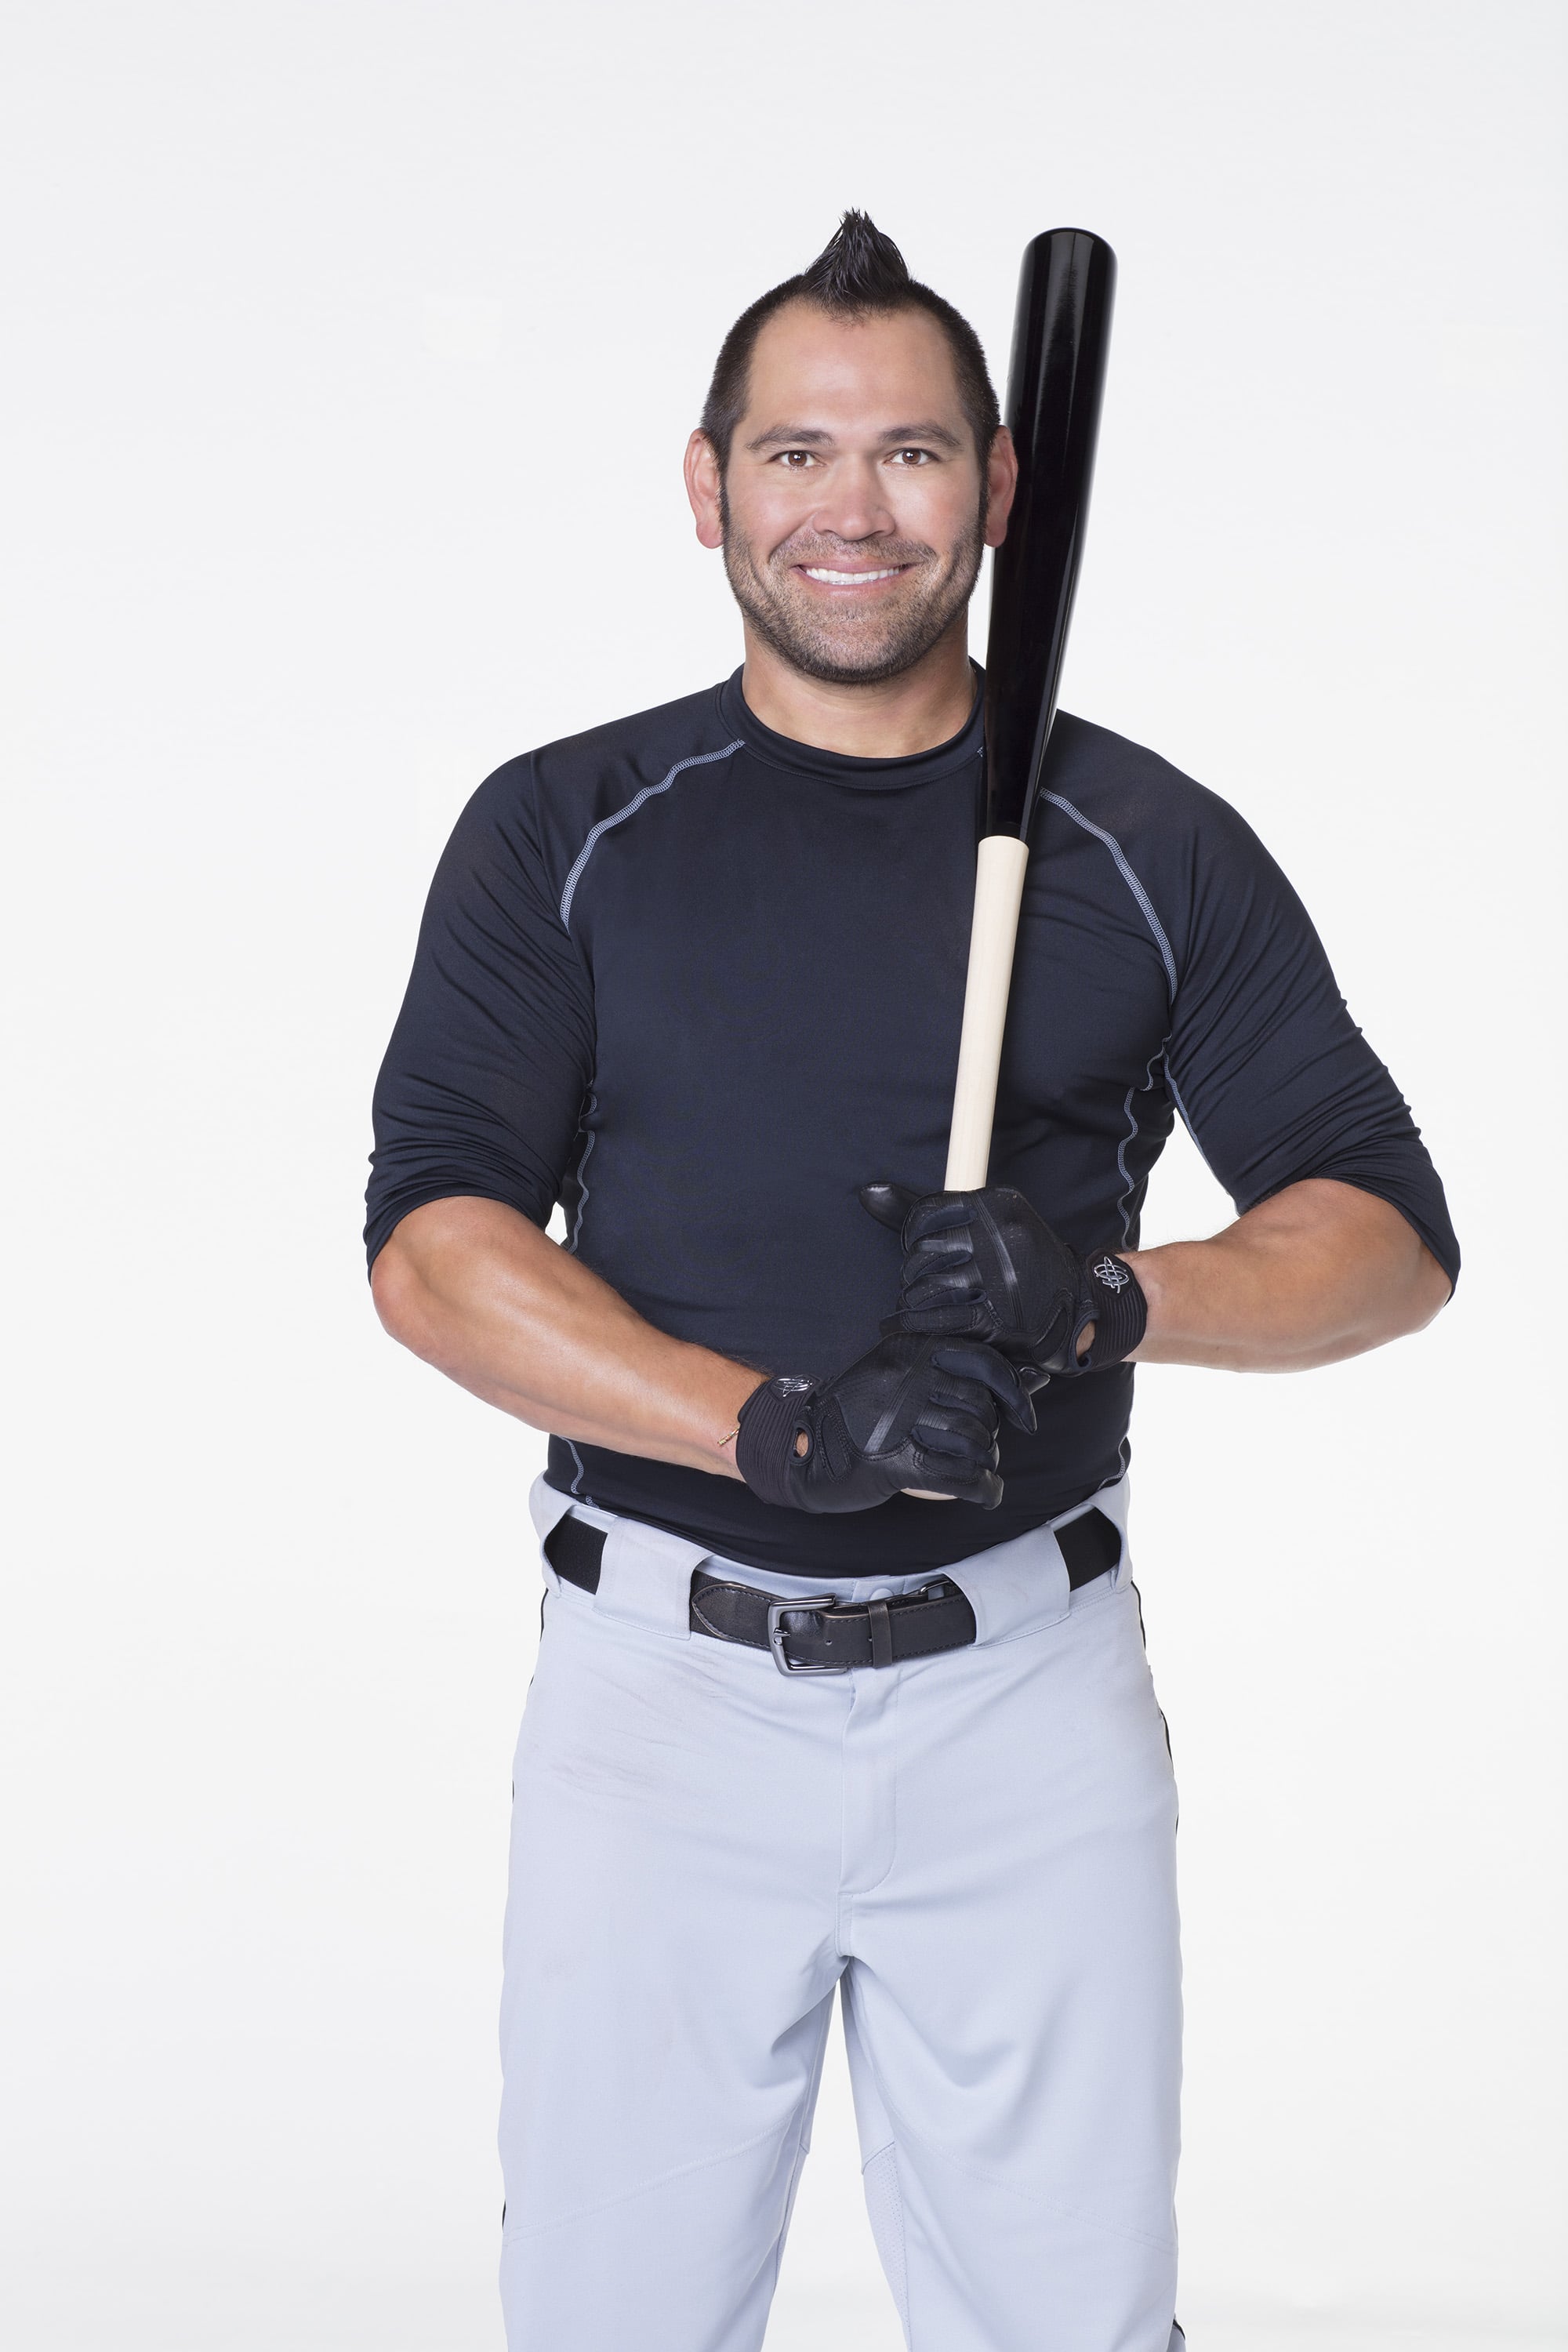 Johnny Damon knows a thing of two about being a champion